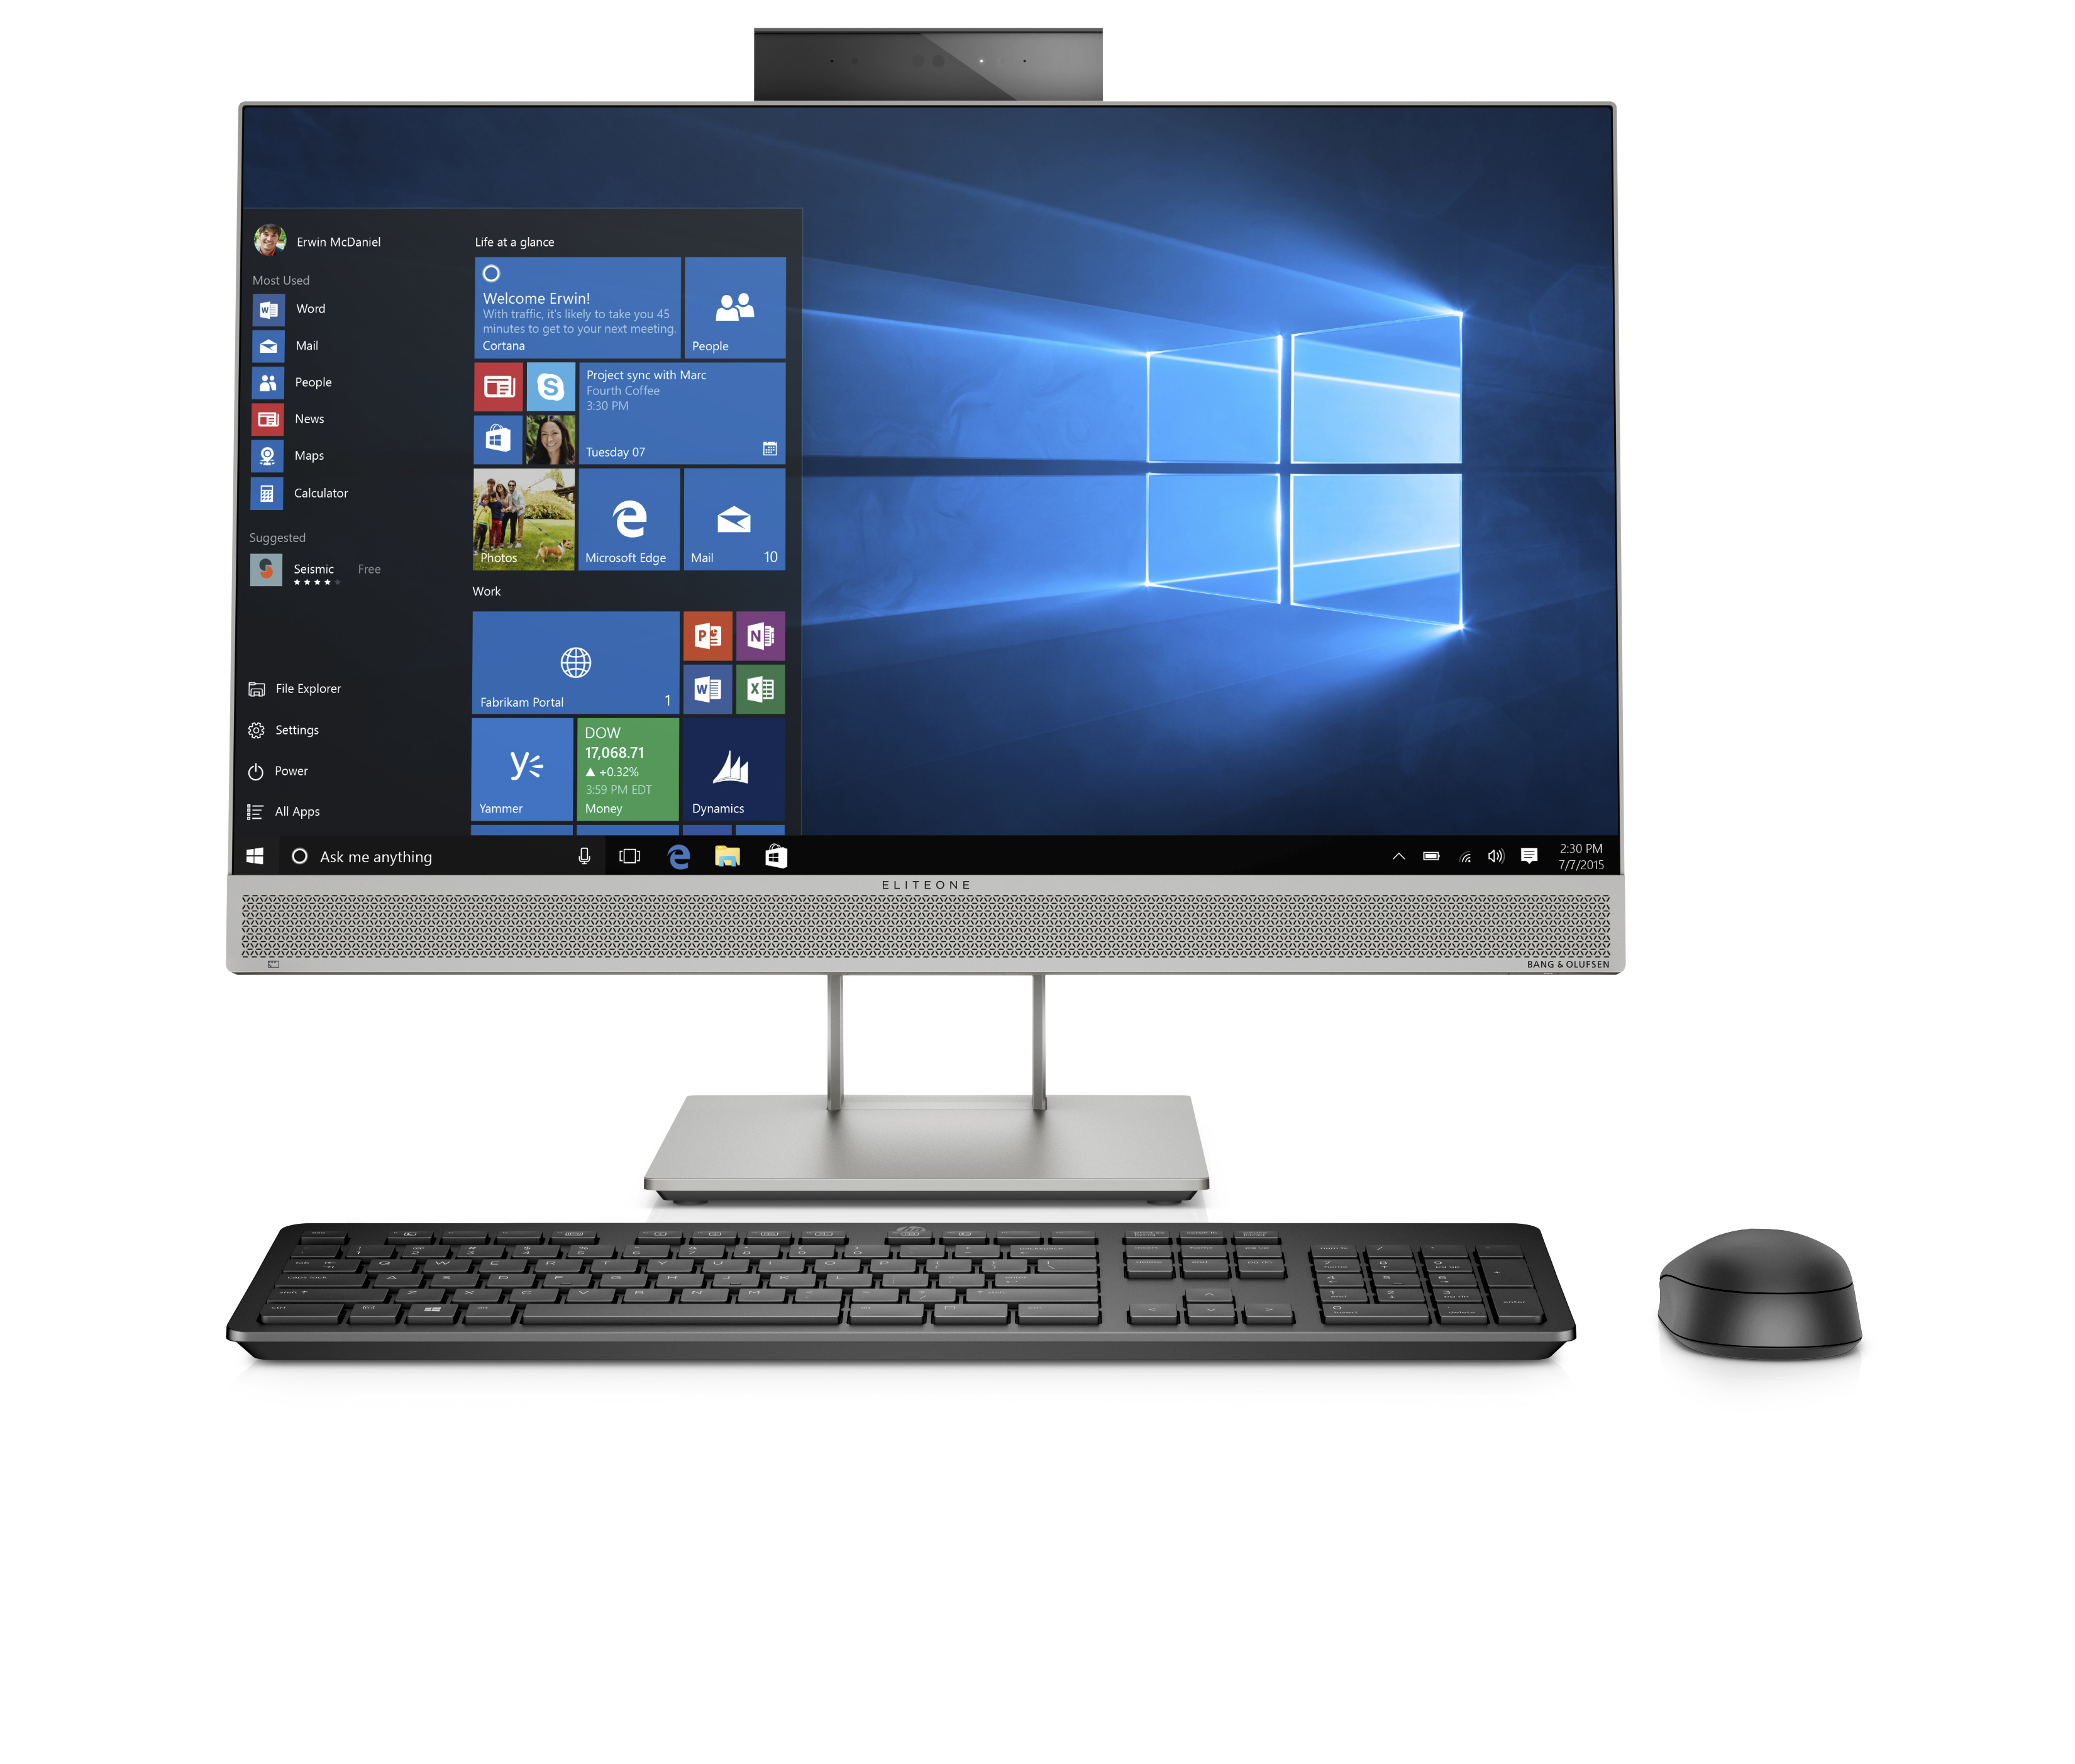 hp launches new monitors and all in one ces 2019 eliteone 800 g5 aio front w webcam